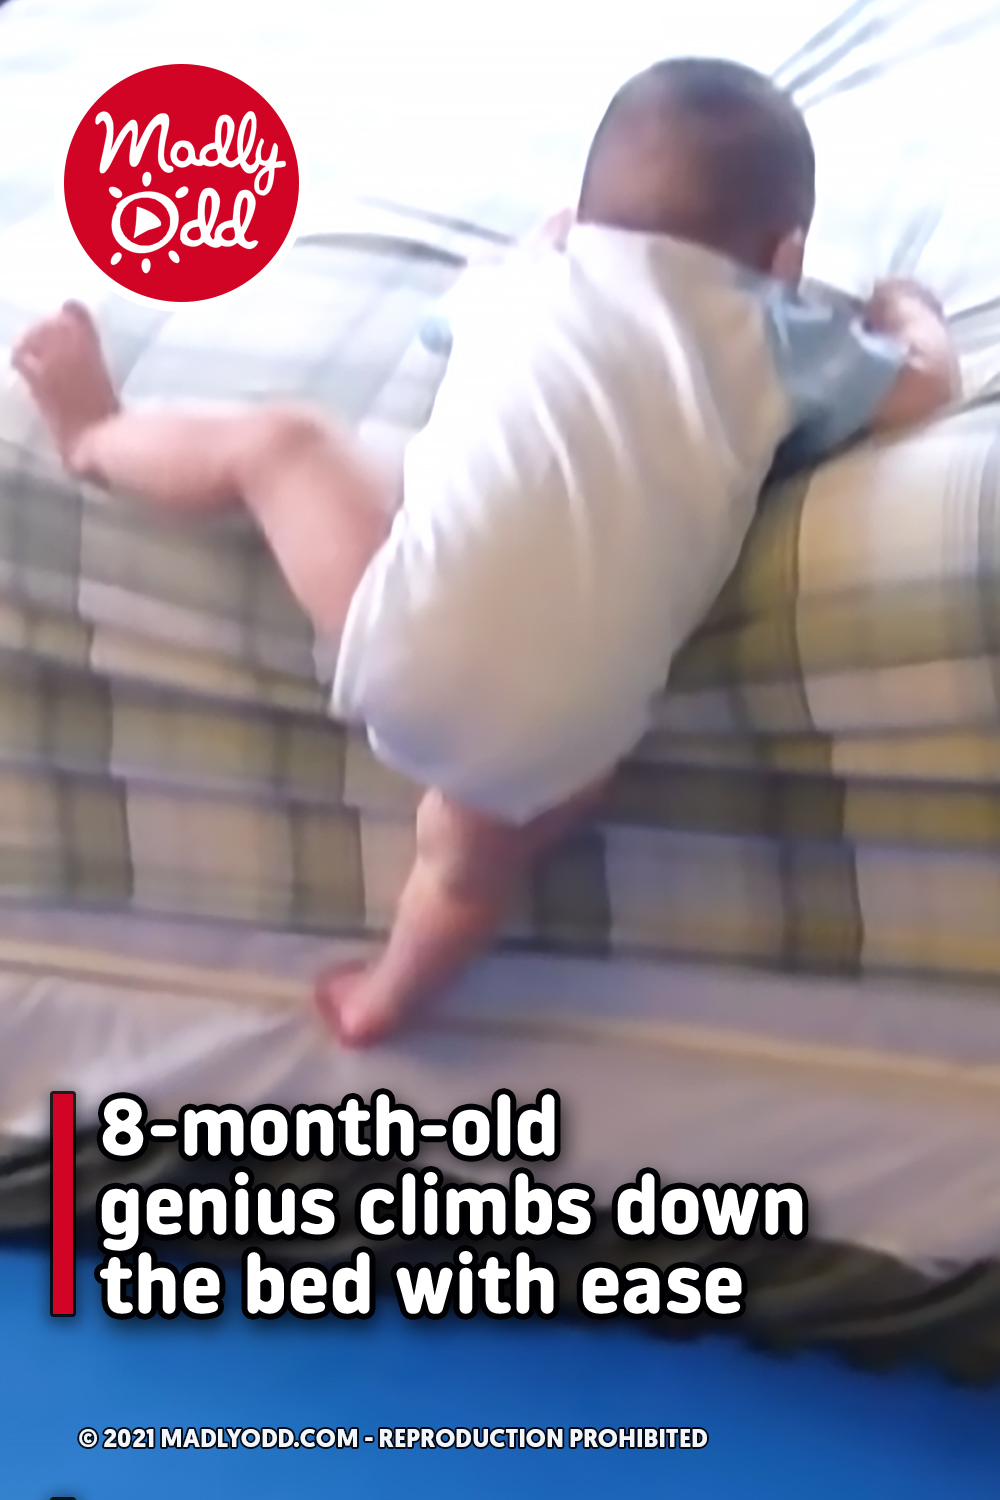 8-month-old genius climbs down the bed with ease